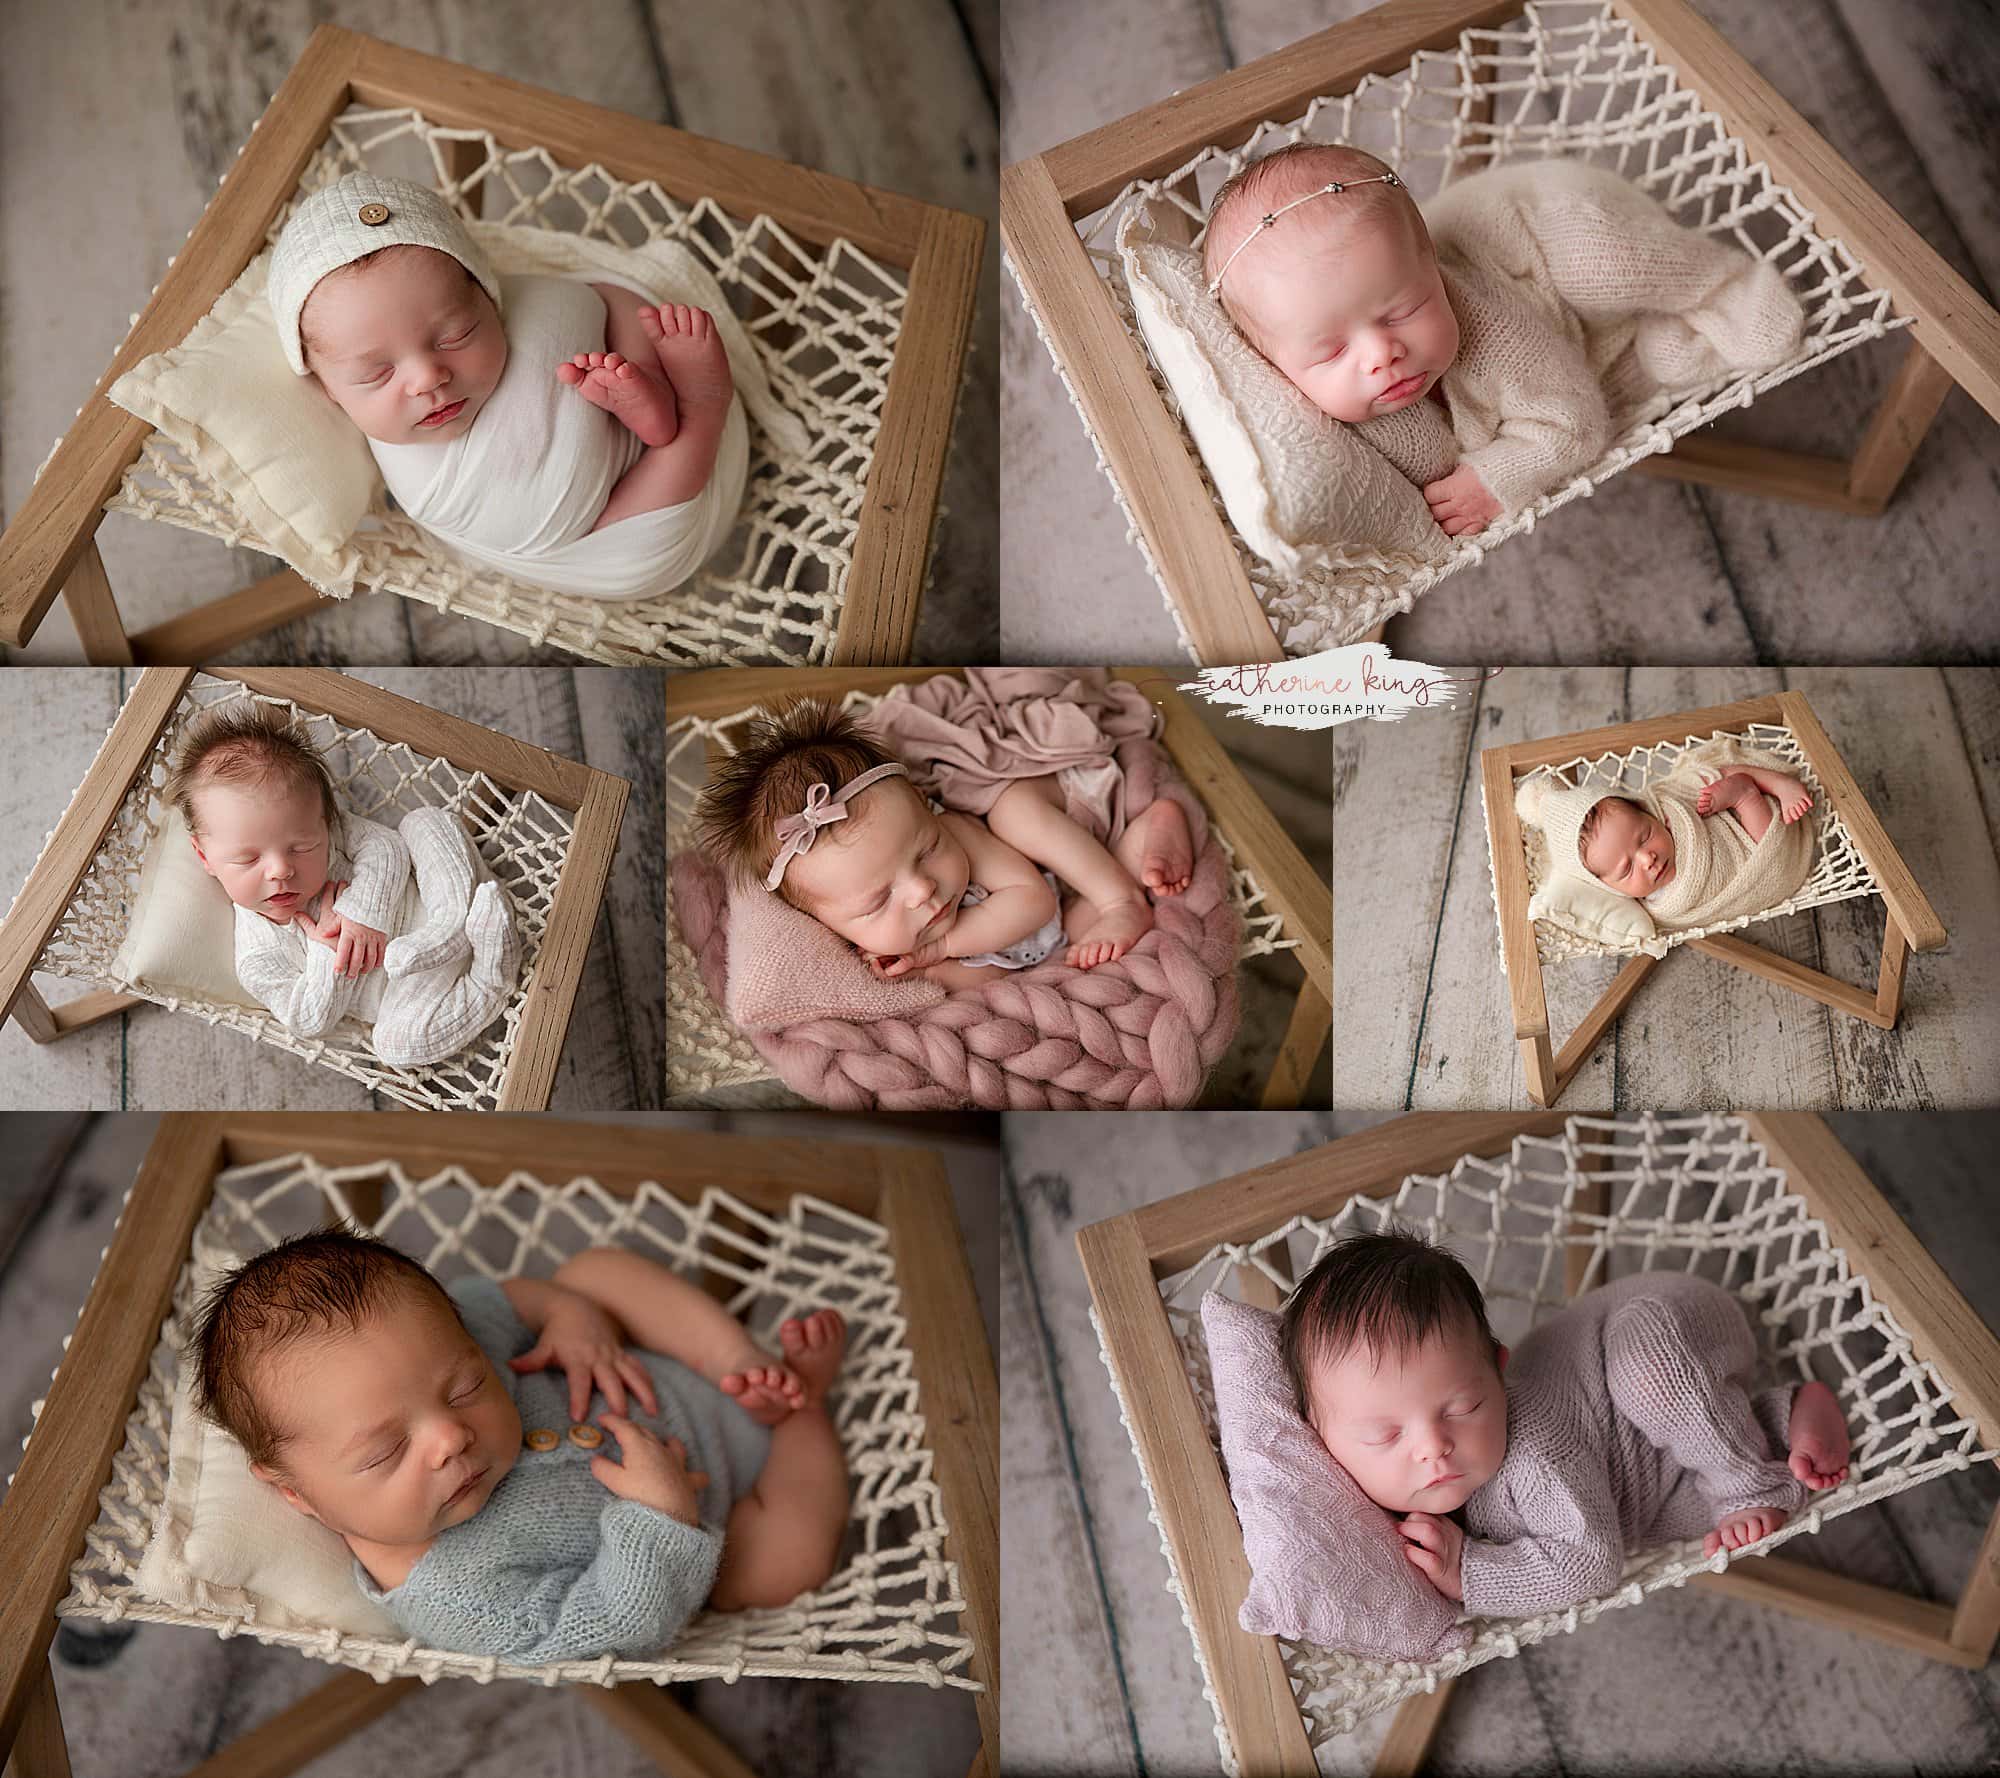 Top 5 Client-Requested Props for Your CT Newborn Photography Session - the macrame hammock